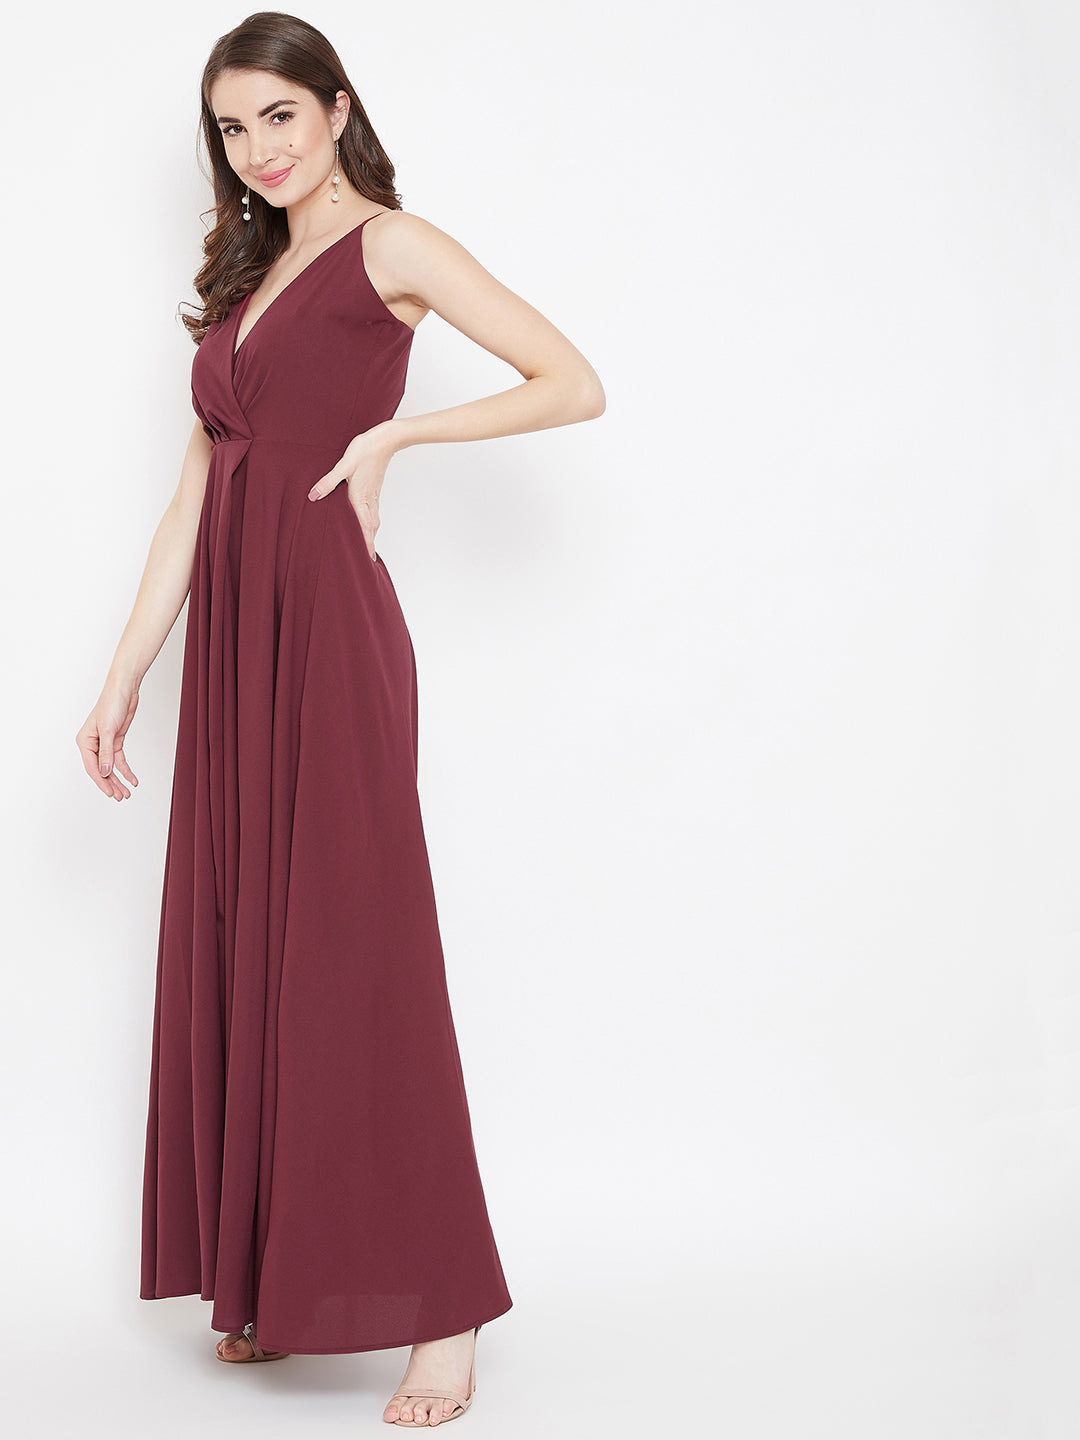 Burgundy Dresses for Women, Maroon & Burgundy Dresses | Couture Candy